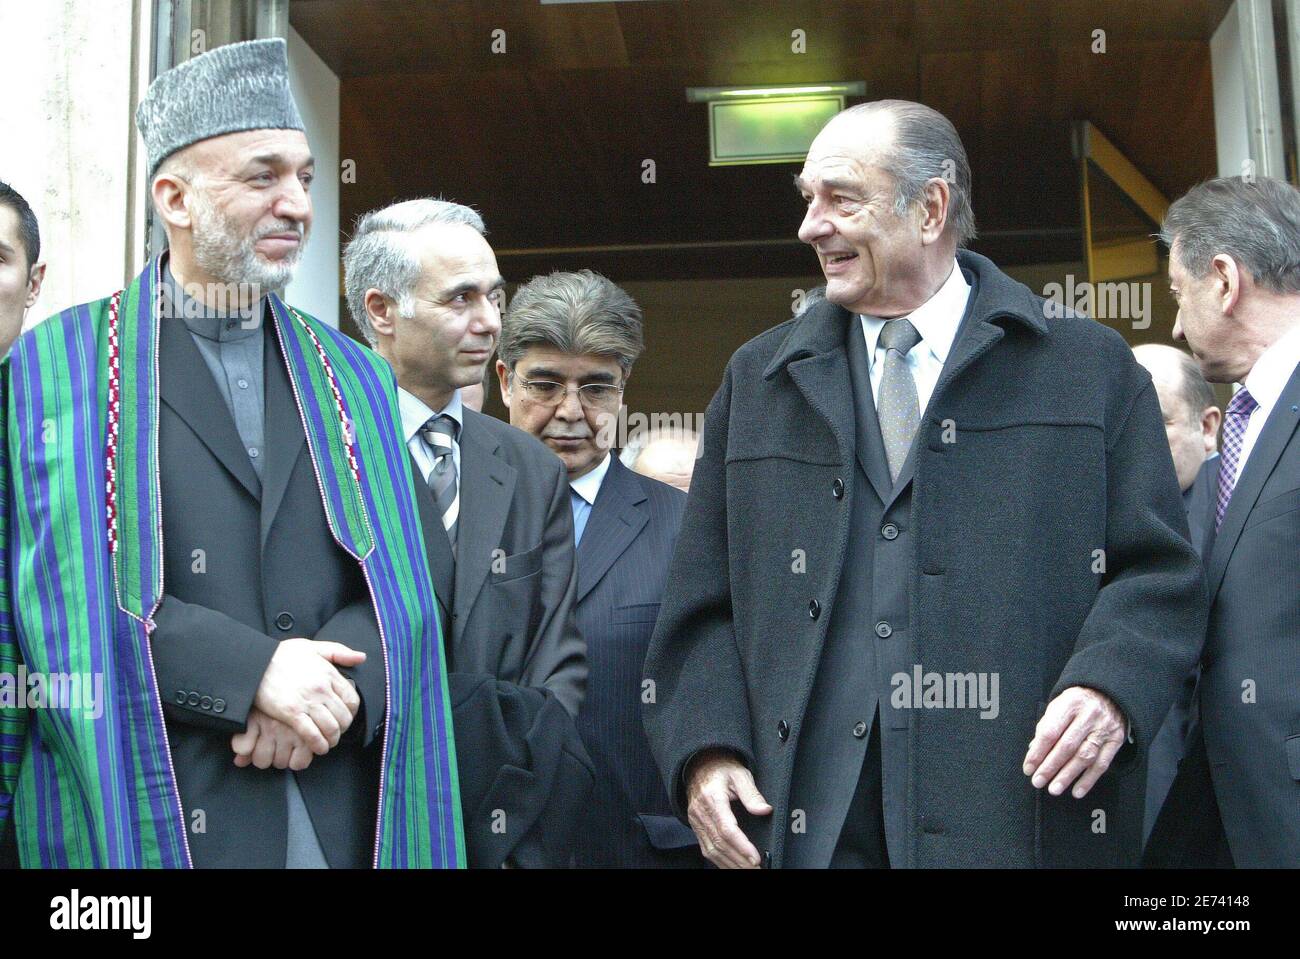 President Jacques Chirac welcomes his afghan counterpart Hamid Karzai at the exhibition 'Afghanistan Treasures' at the Guimet Museum in Paris, France, Monday, March 19, 2007. Photo by Bernard Bisson/ABACAPRESS.COM Stock Photo